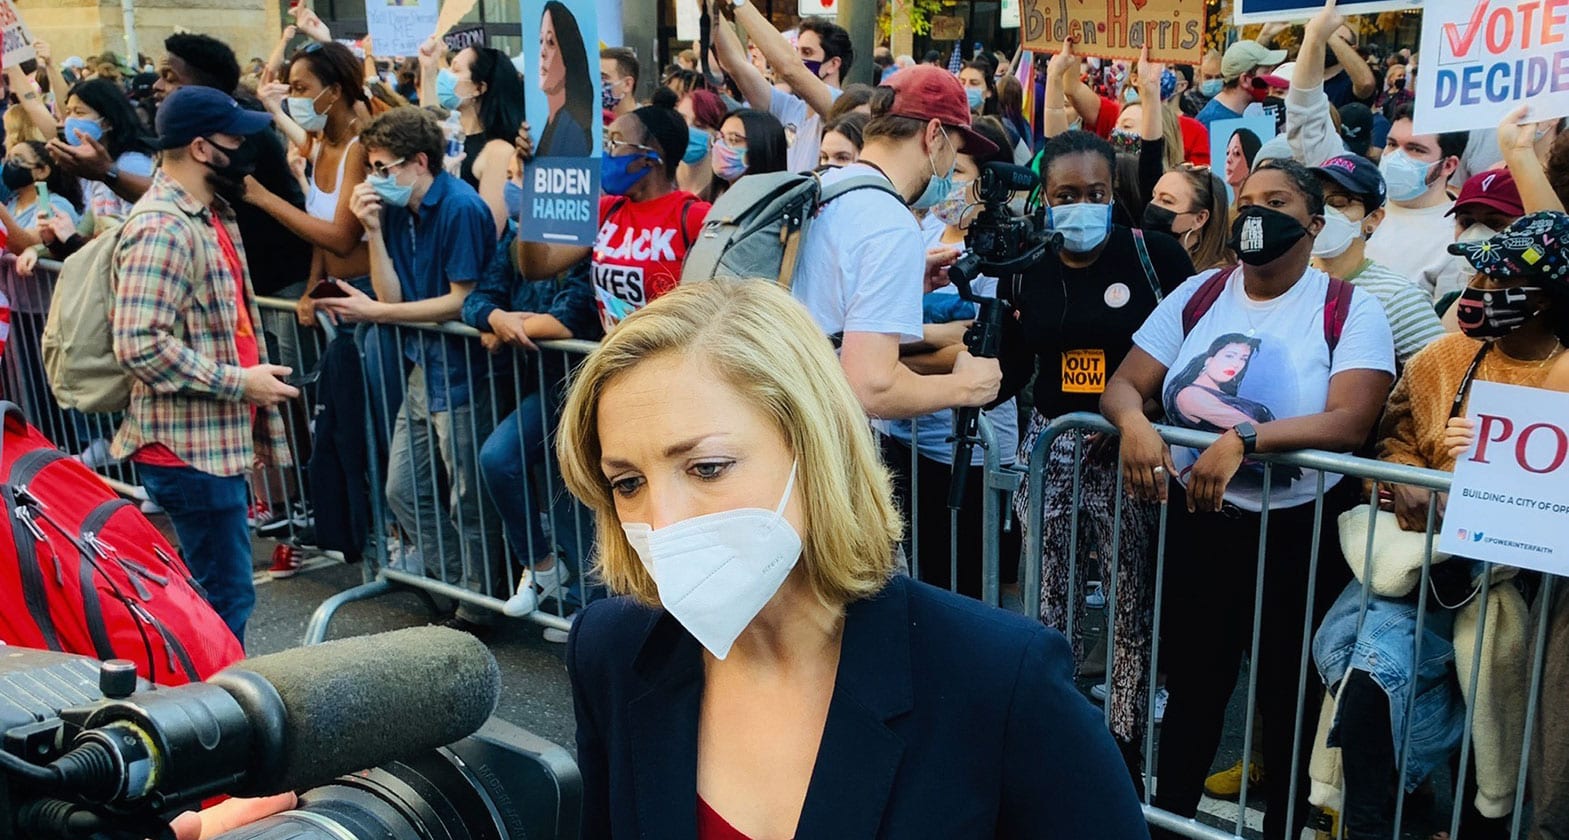 Kathryn Diss covering protests over the election result in Philadelphia, Pennsylvania.